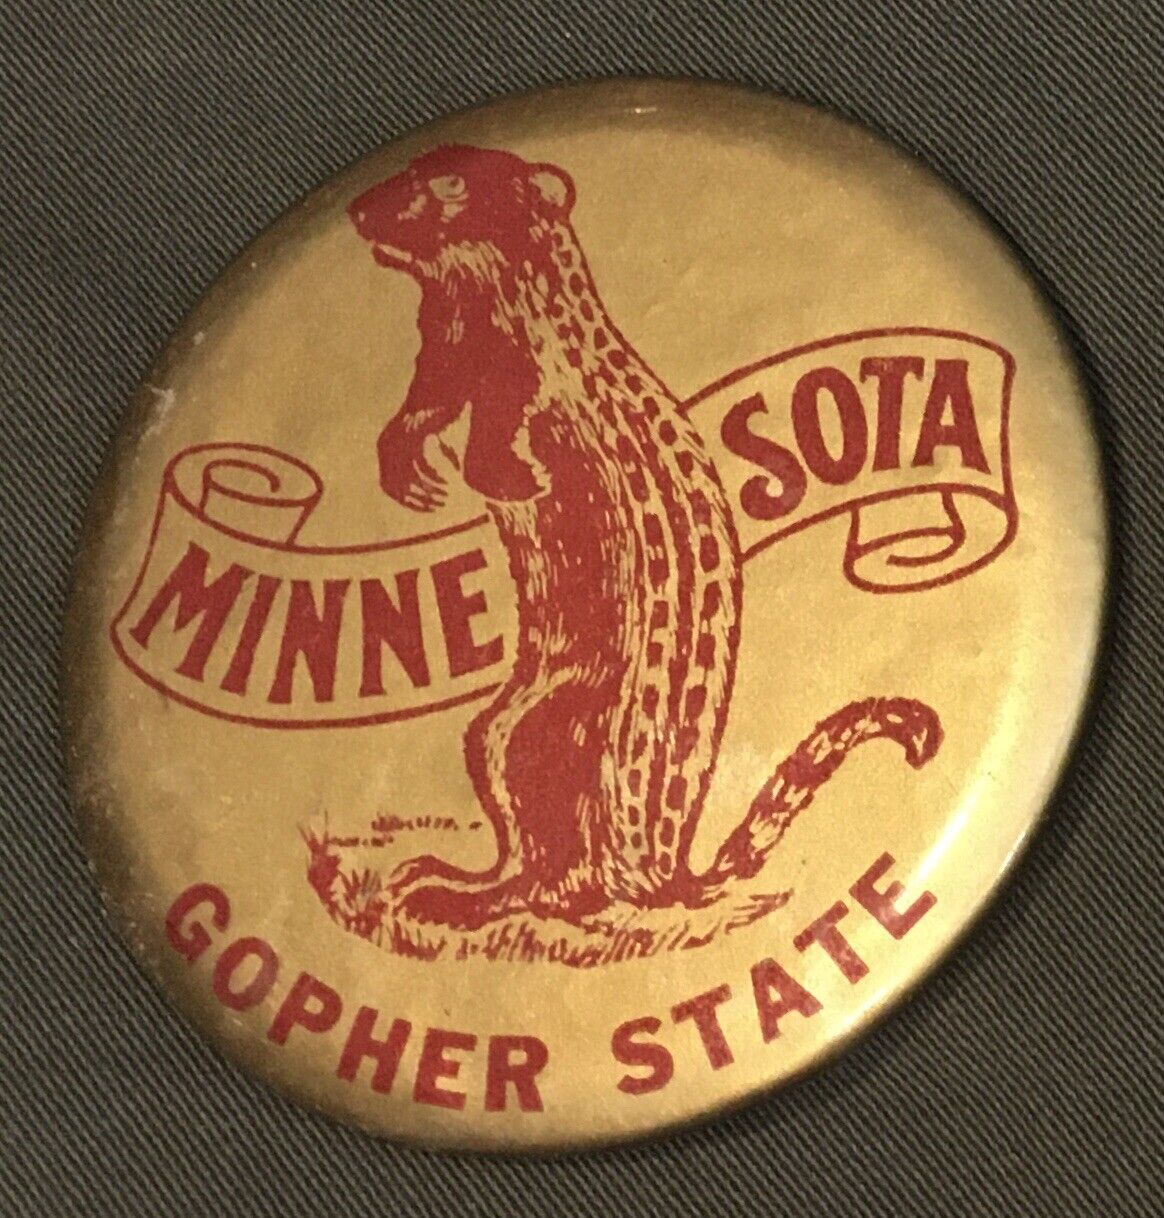 Vintage Minnesota Gopher State Pinback Button 2 15/16” Across Gold Colored